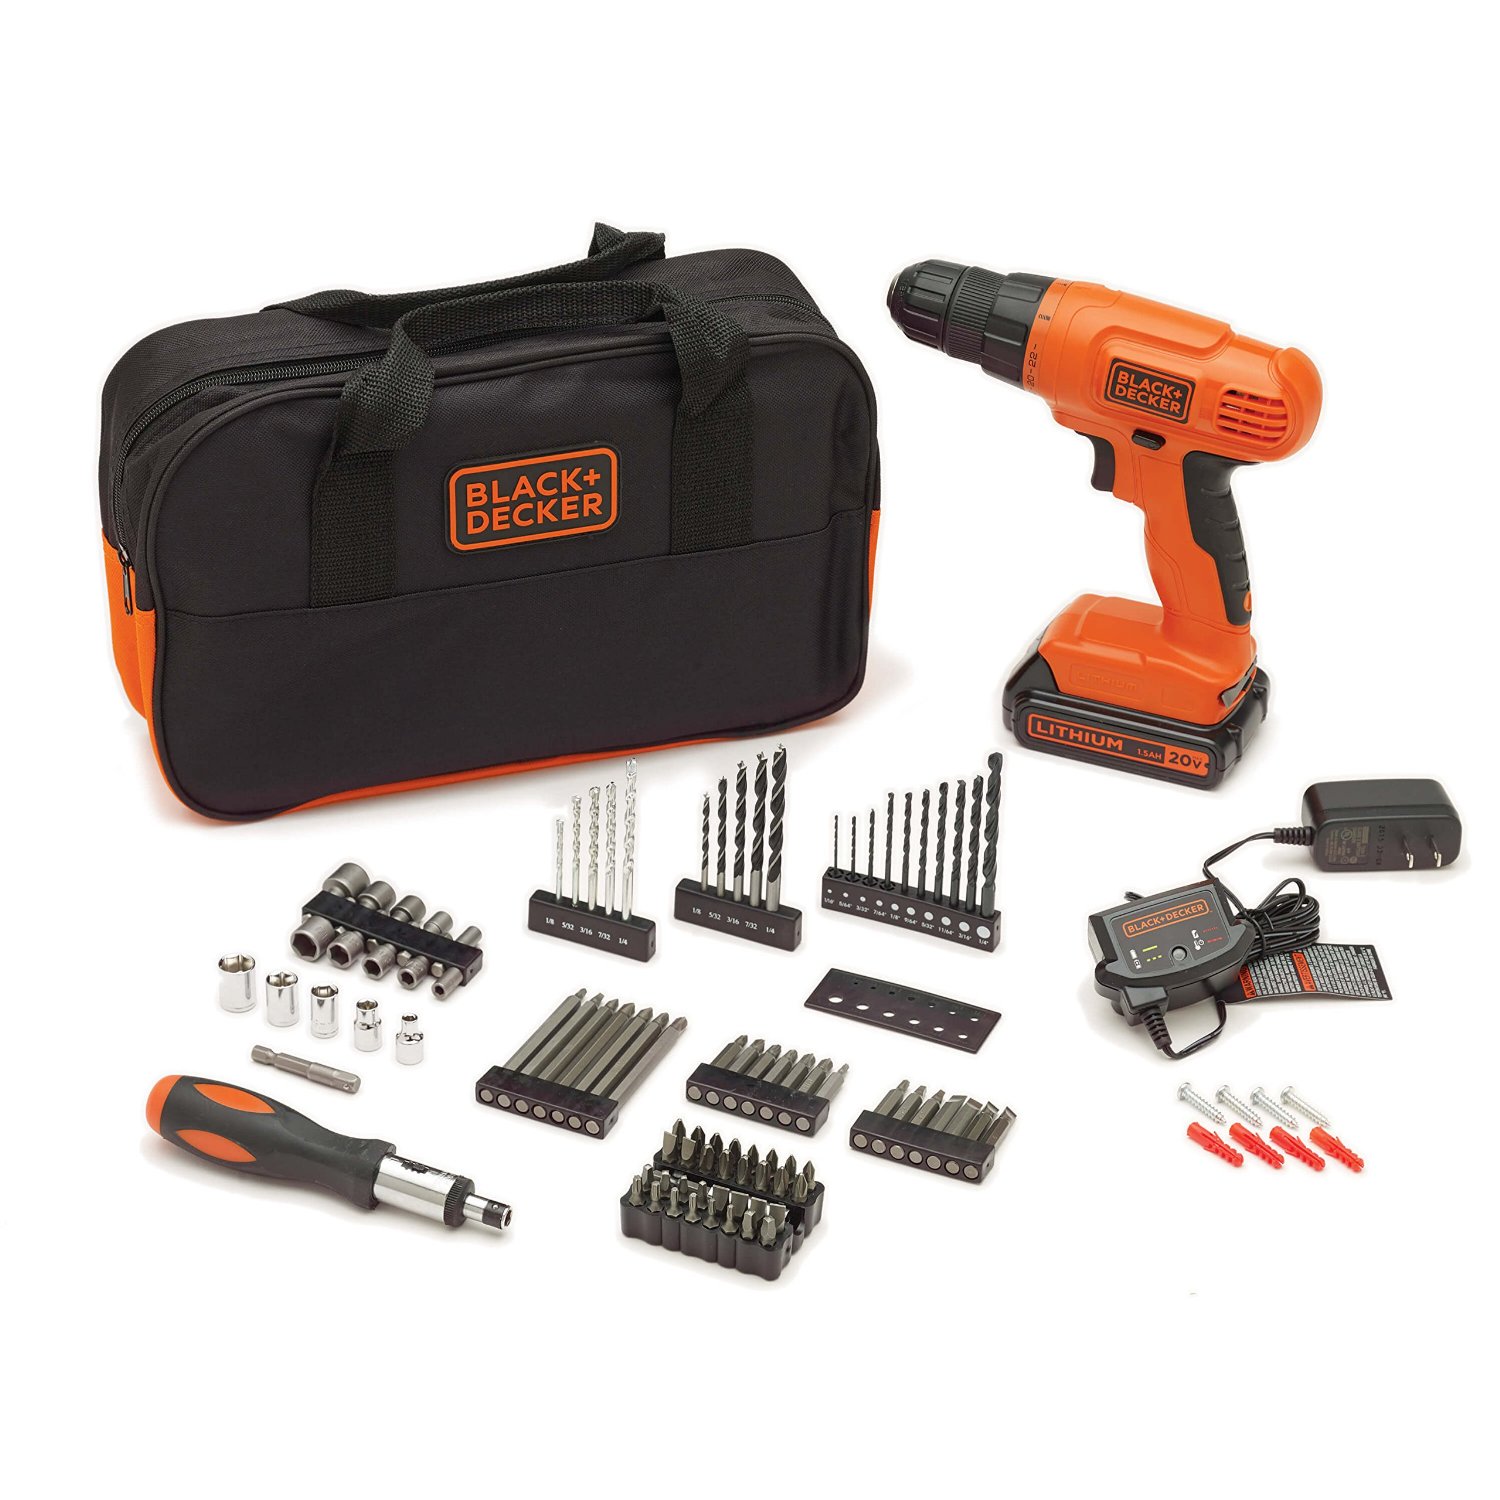 BLACK+DECKER 20-Volt MAX Lithium-Ion Drill Kit with 100 Accessories – Just $59.99!